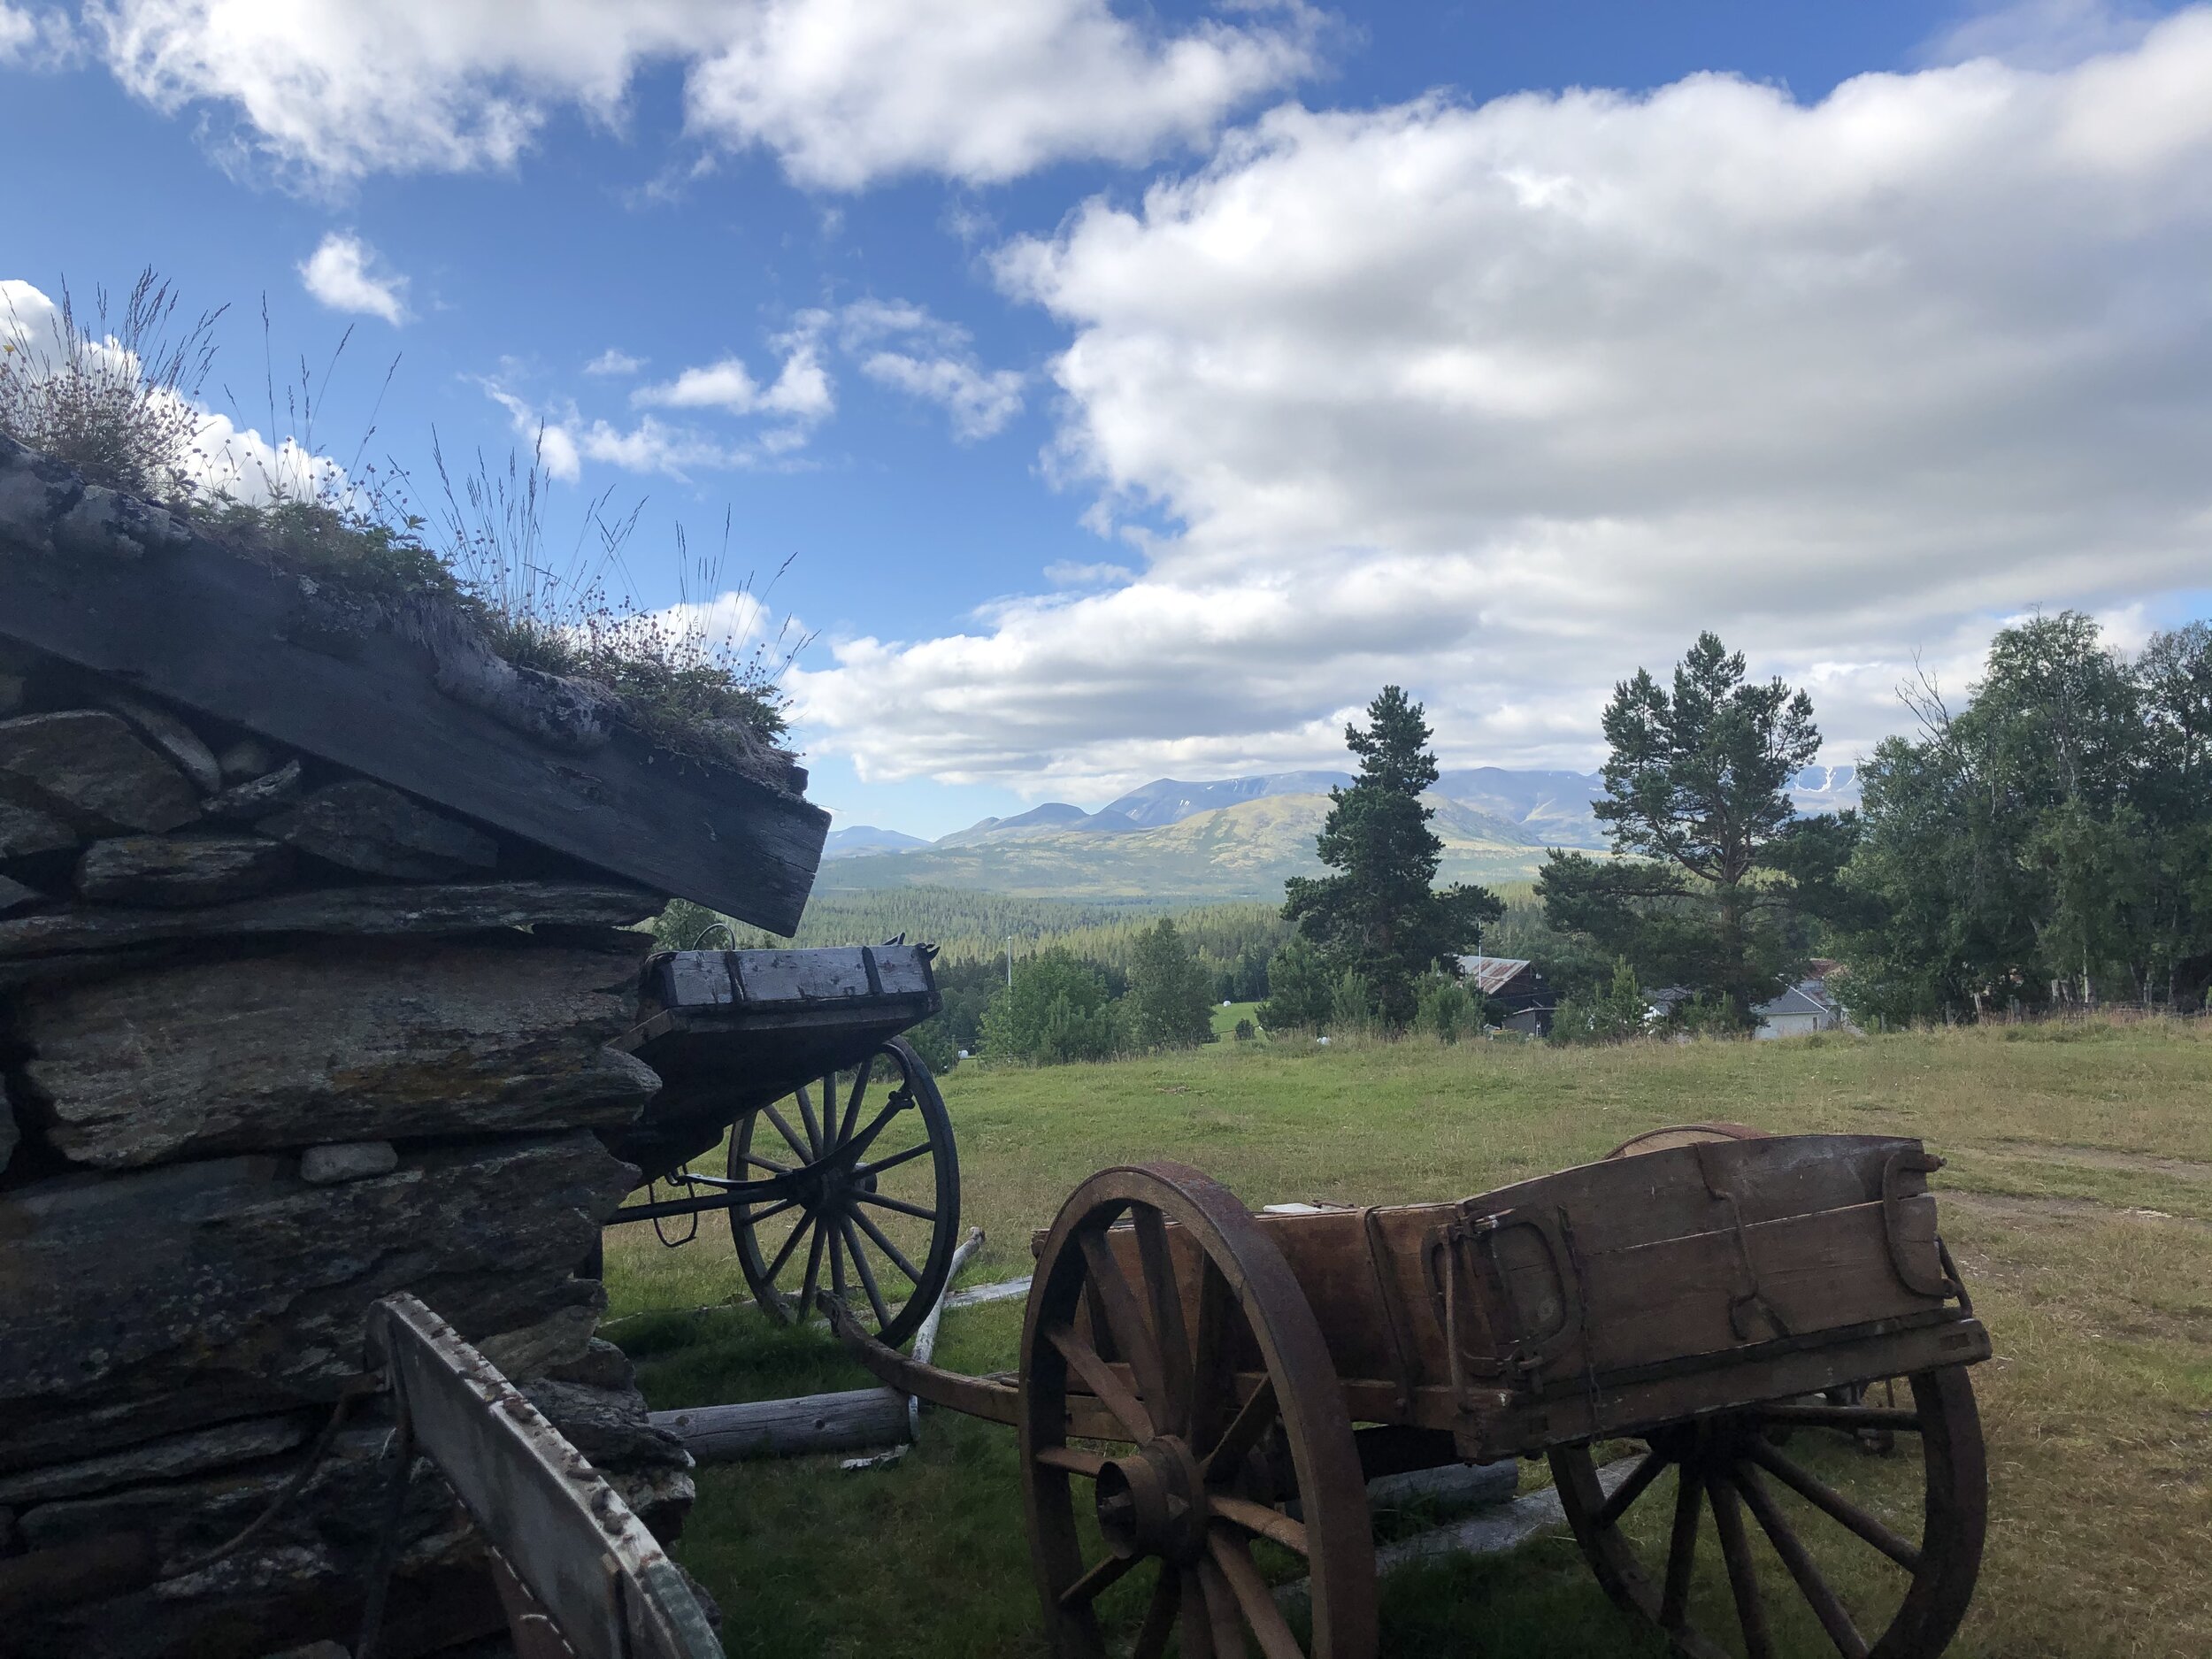 Gudbrundsdalen: a Norwegian centre of old Norwegian farm history and culture.